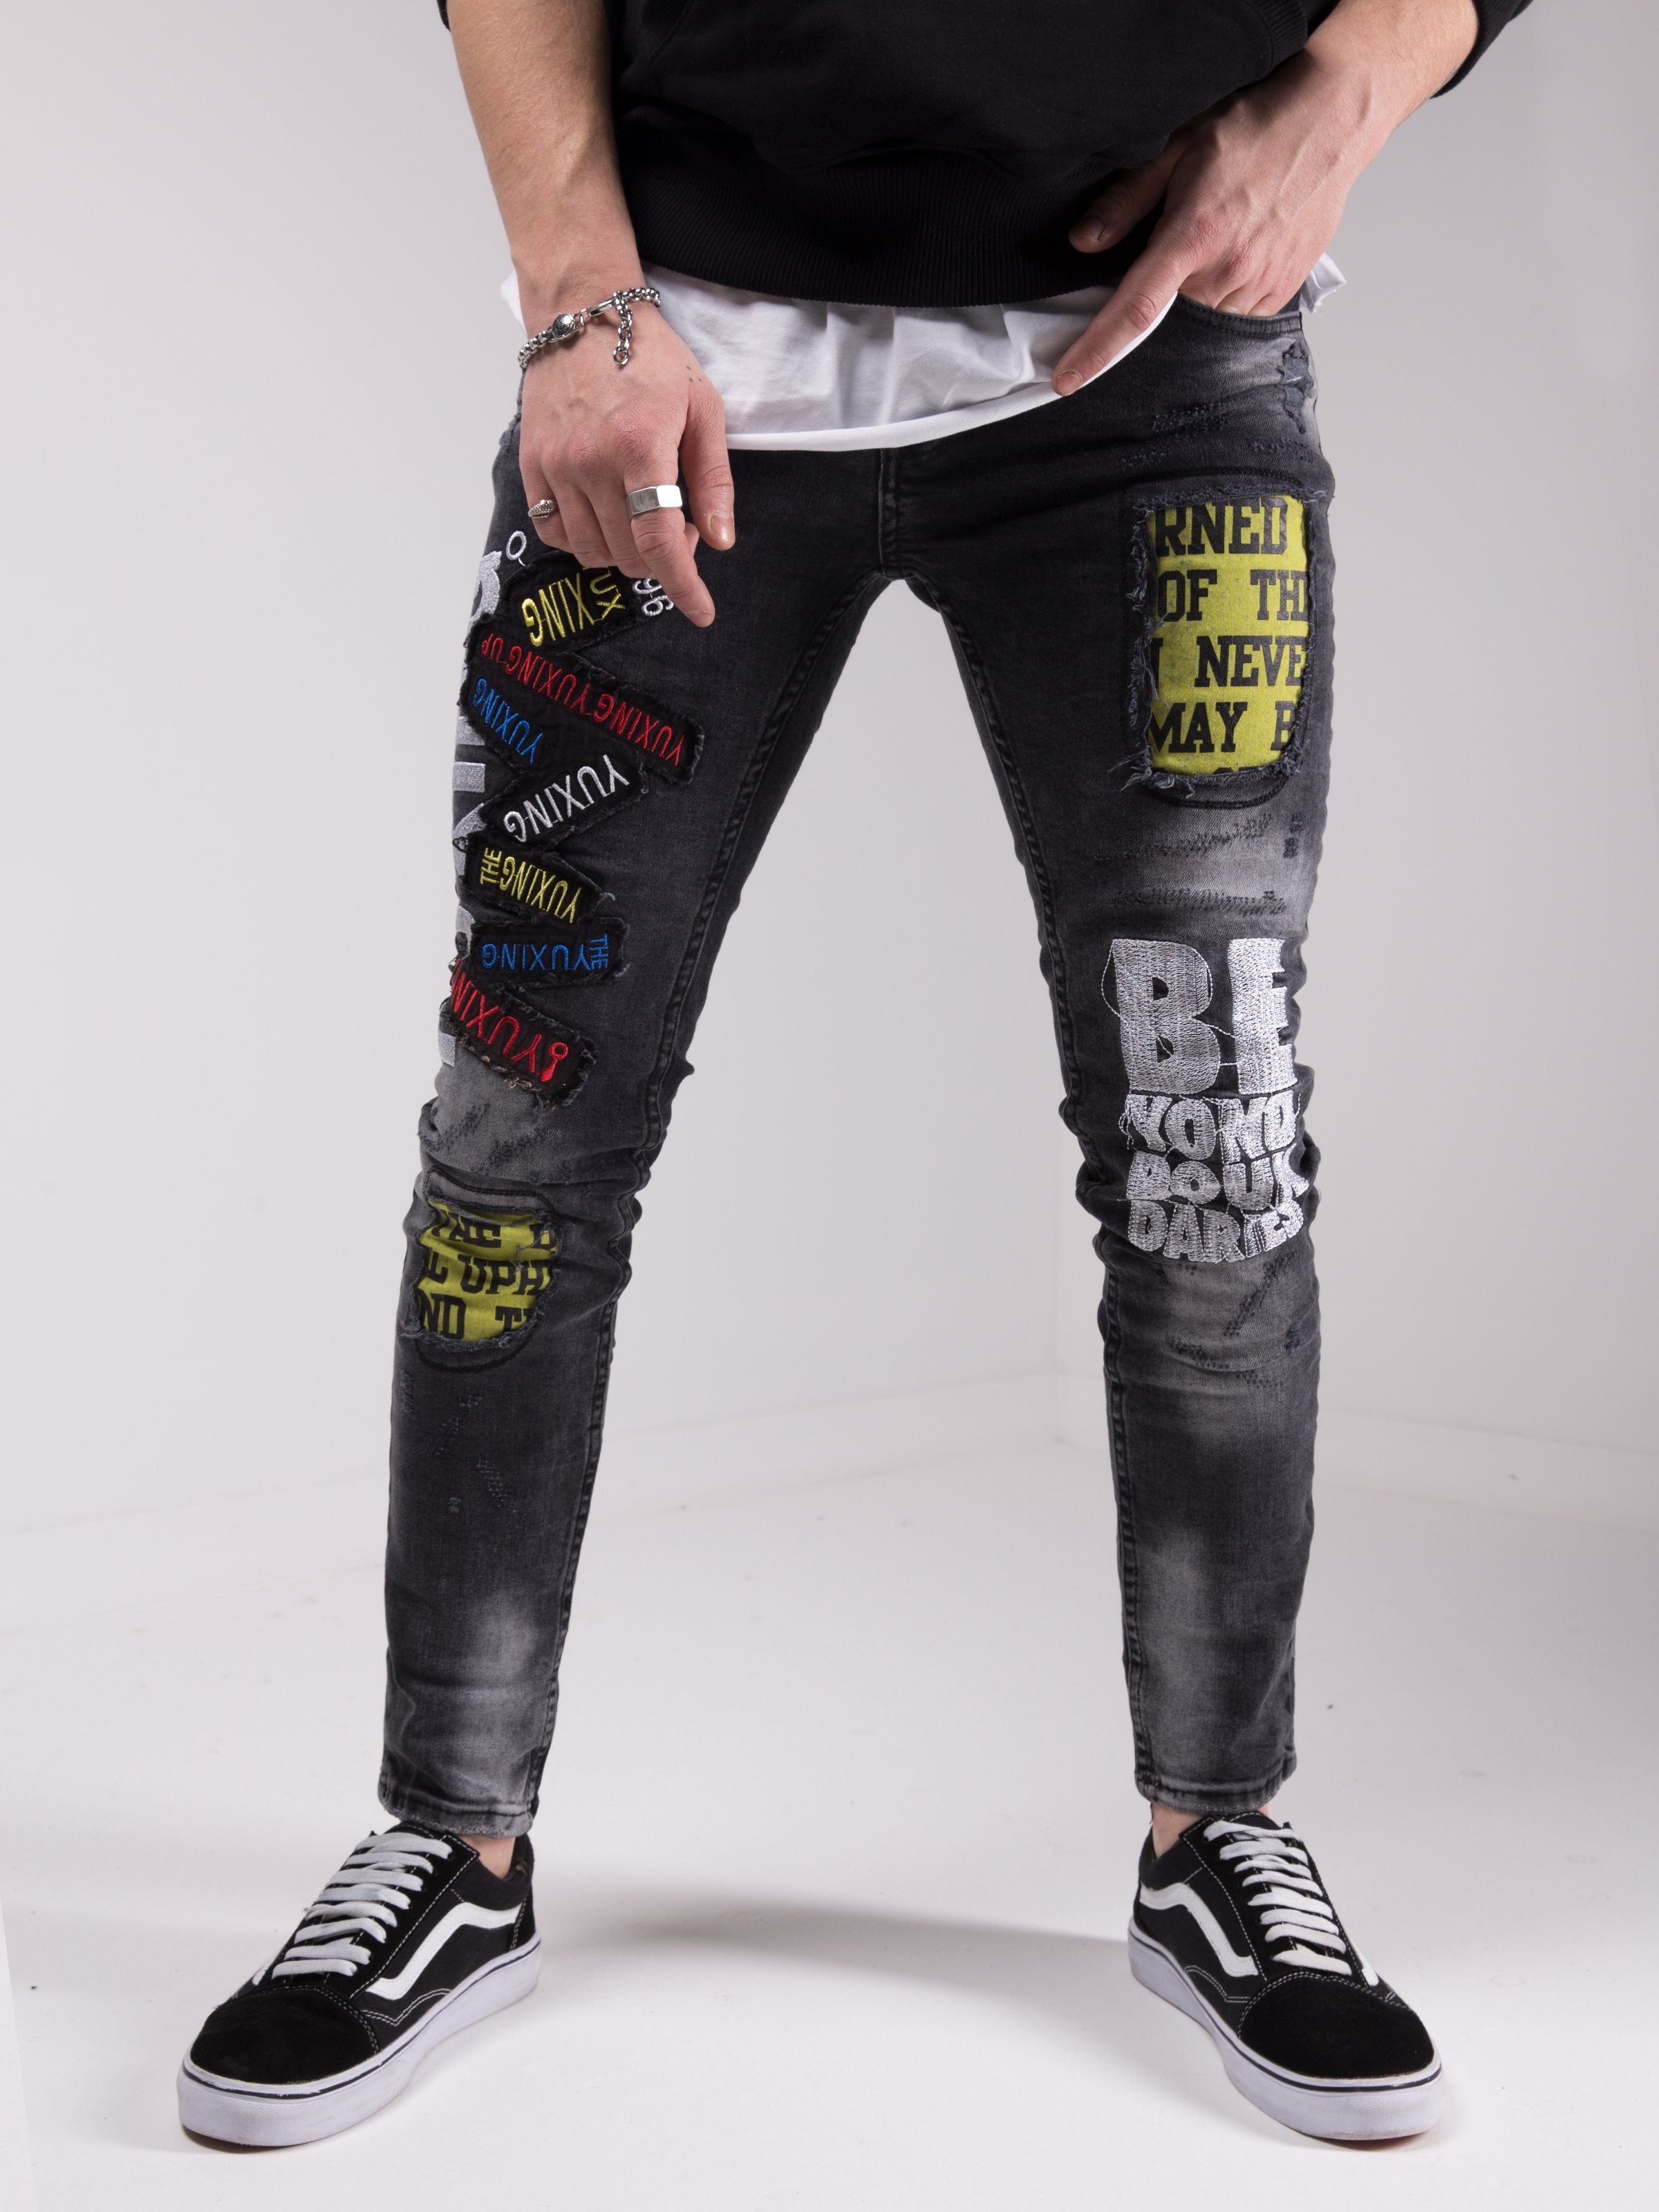 A man wearing a pair of SAVAGE SECRET jeans with patches on them.